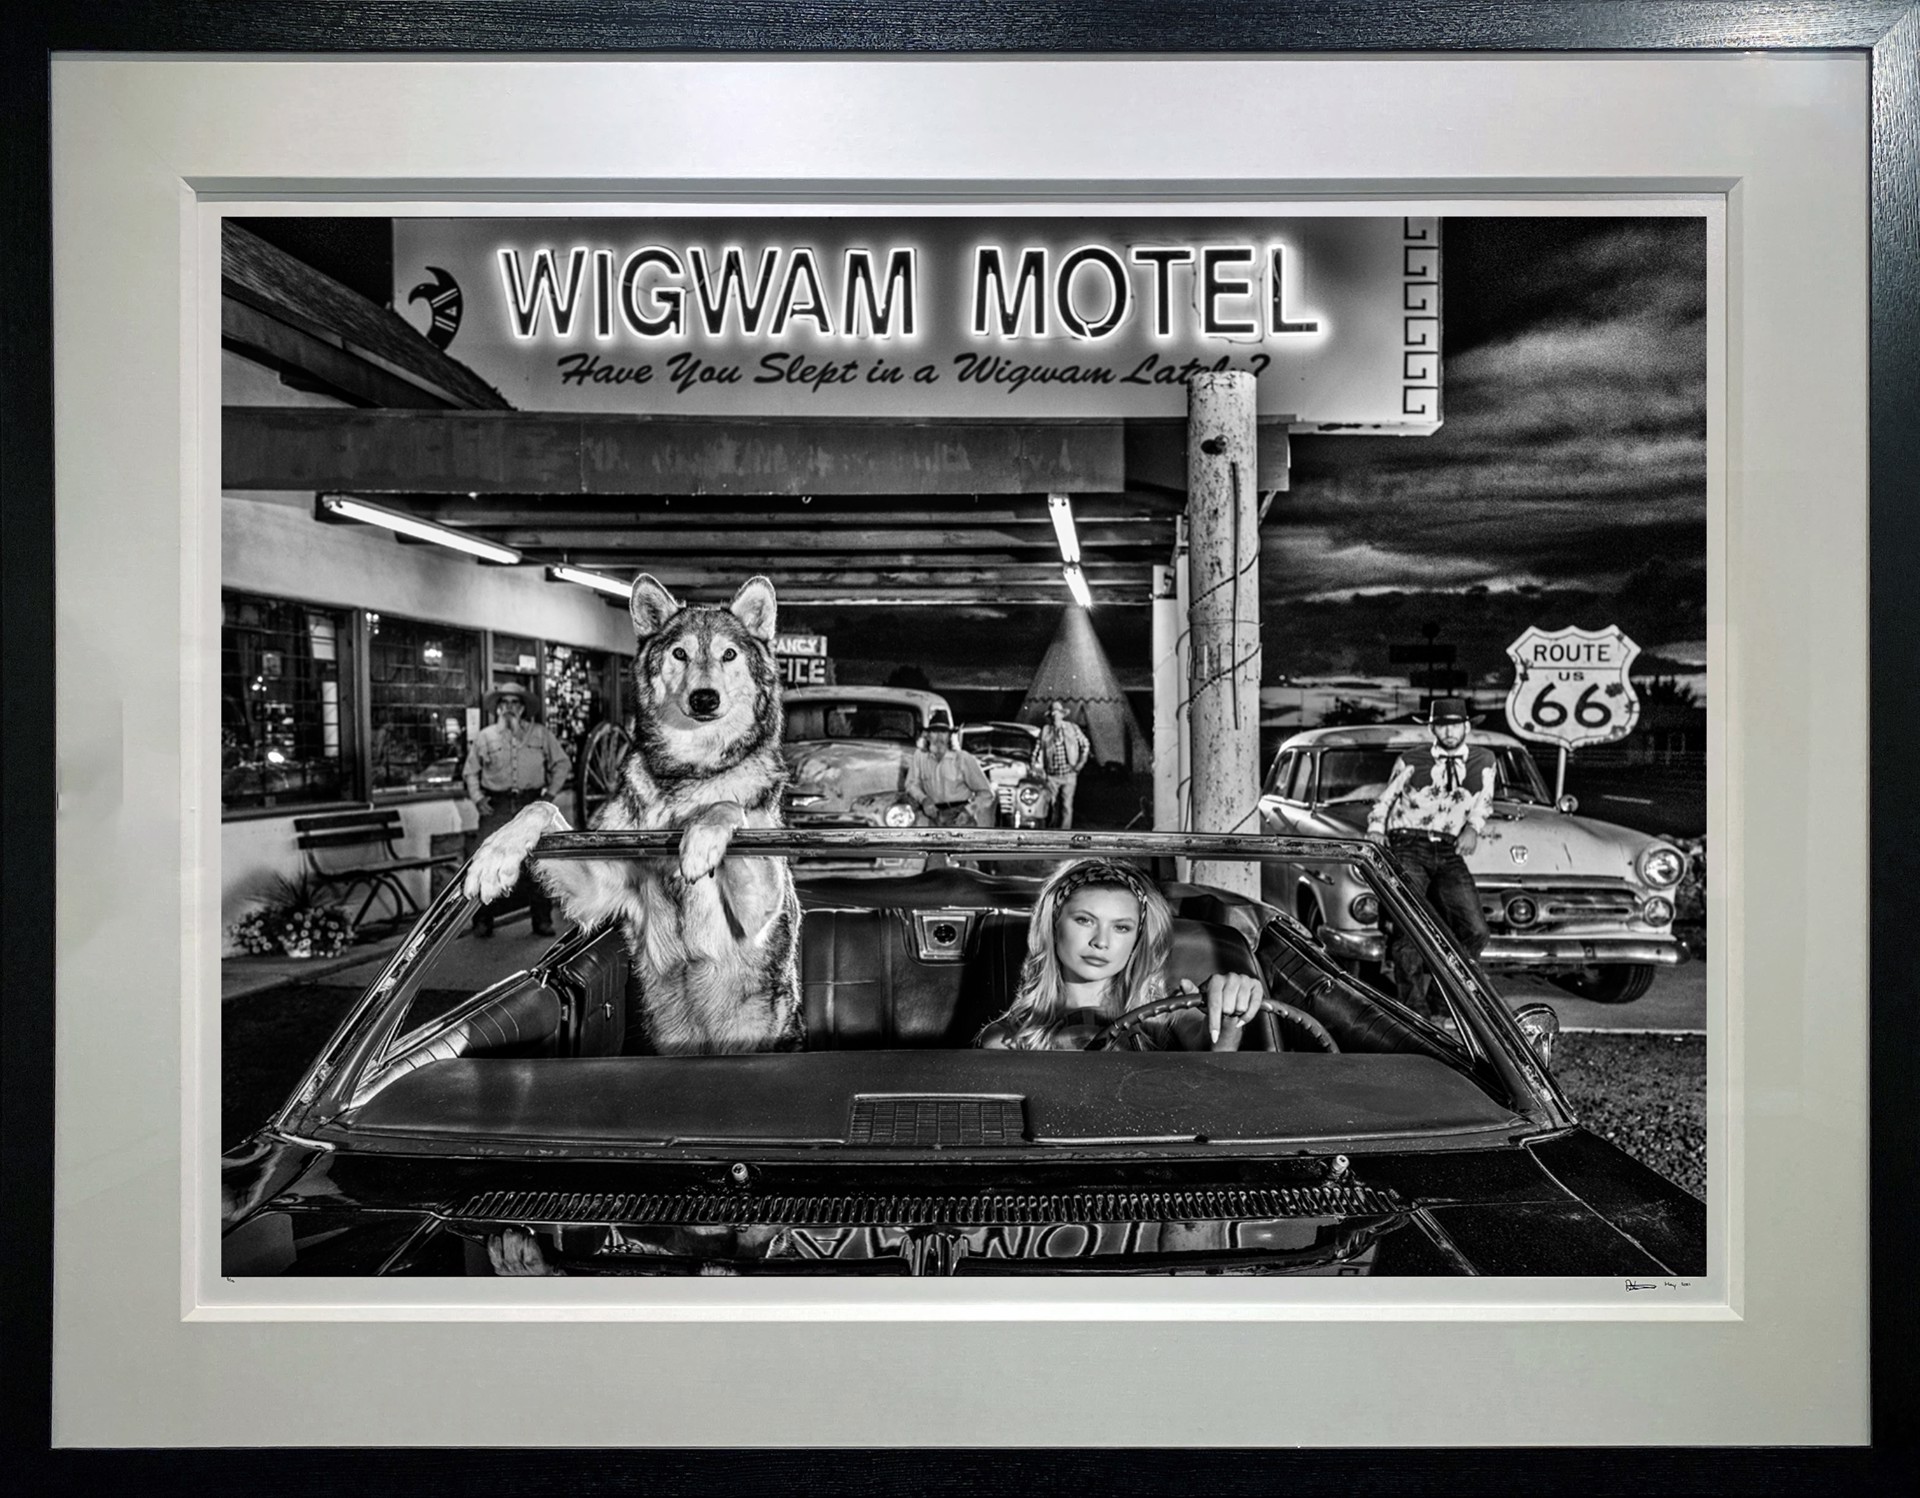 Route 66 by David Yarrow